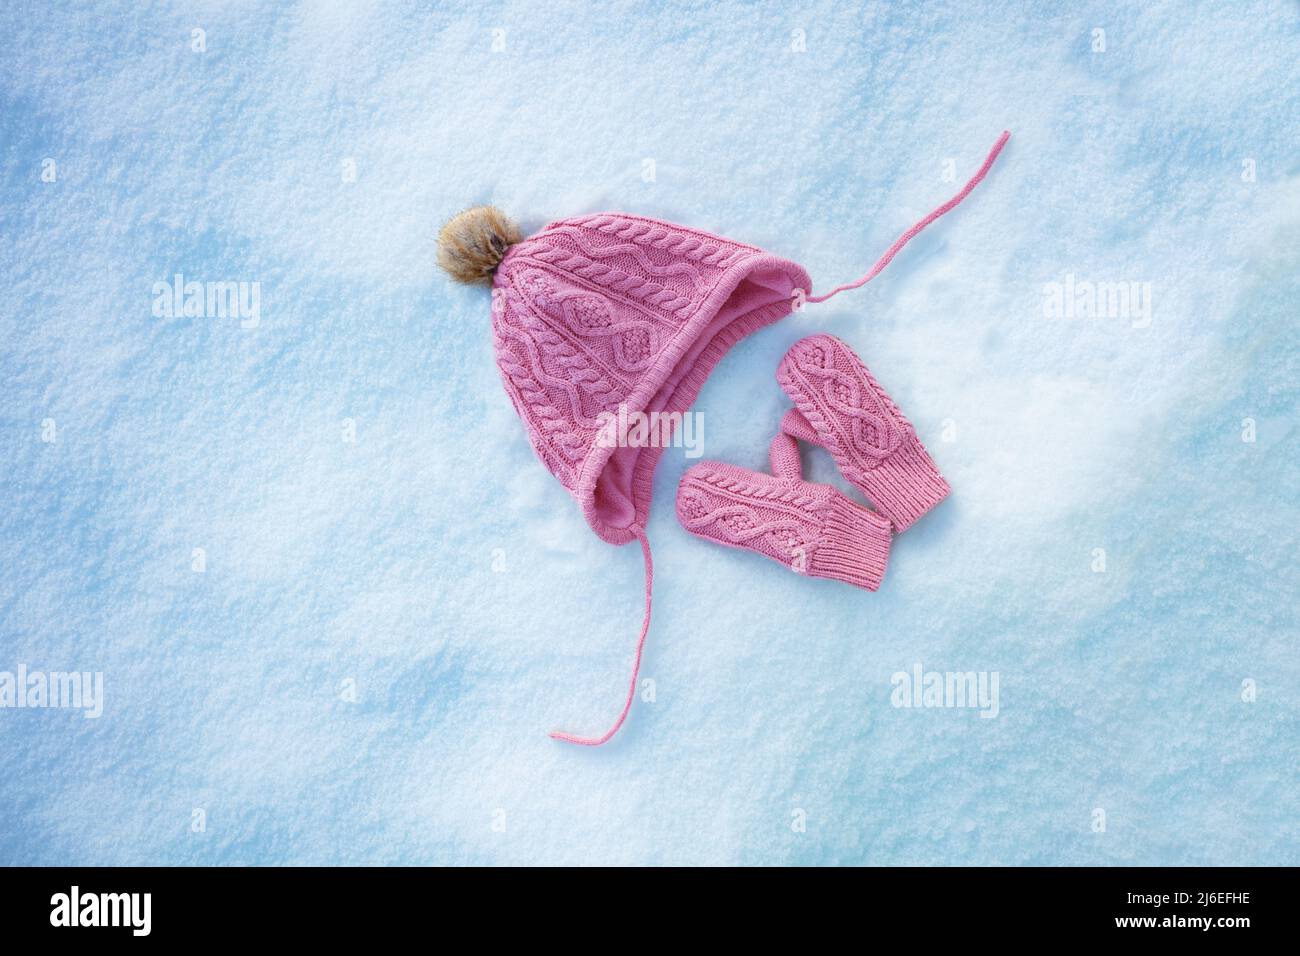 Vivid pink hat and mittens in the snow, view from above Stock Photo